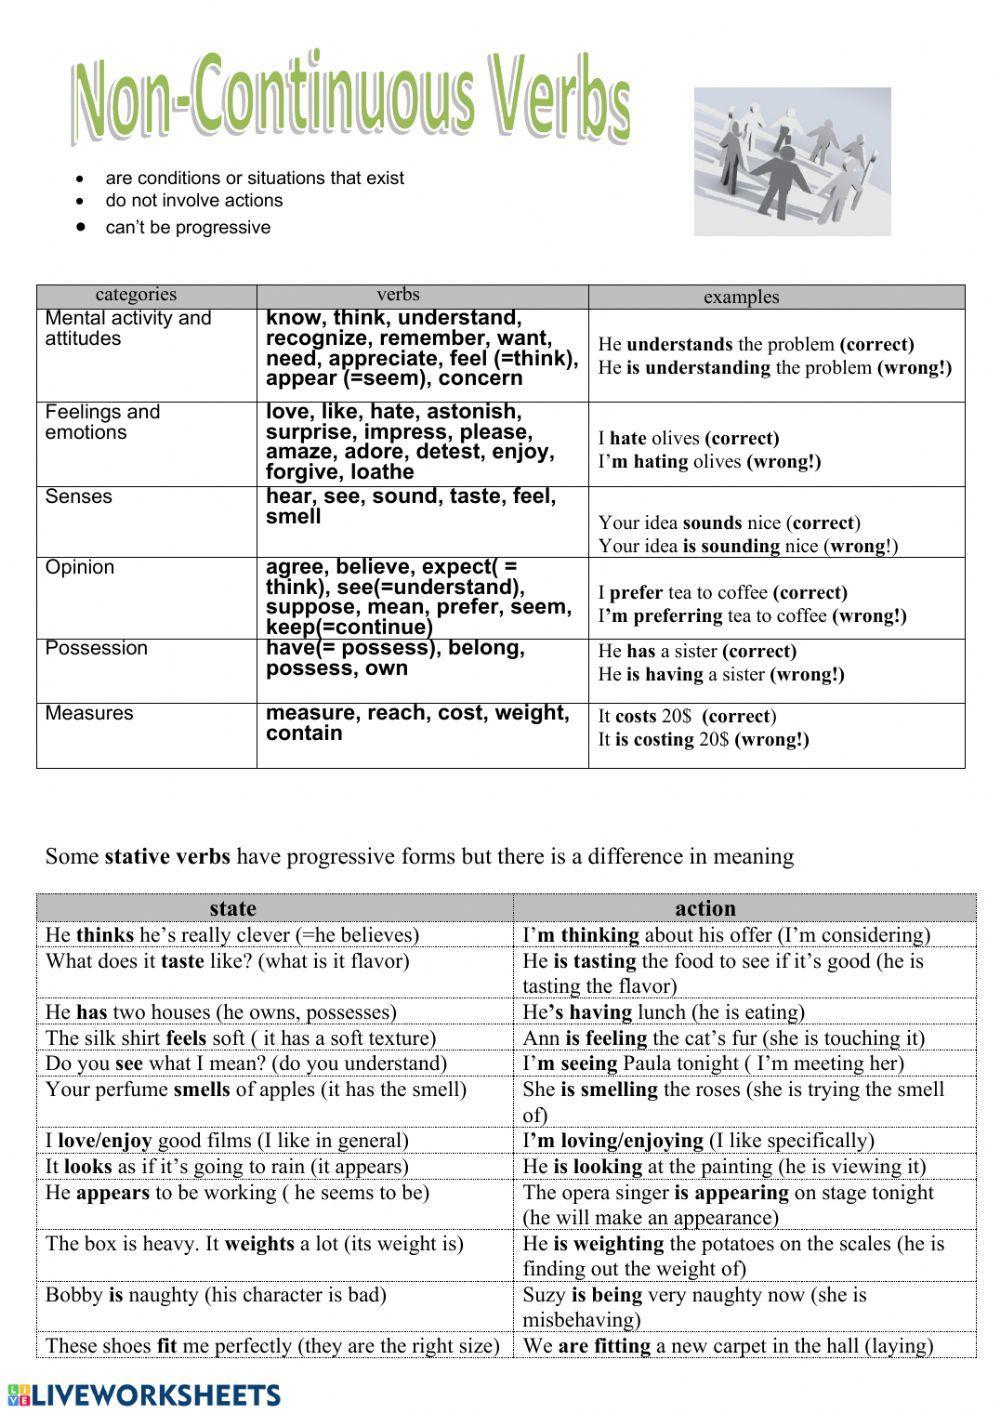 Stative and non-stative verbs